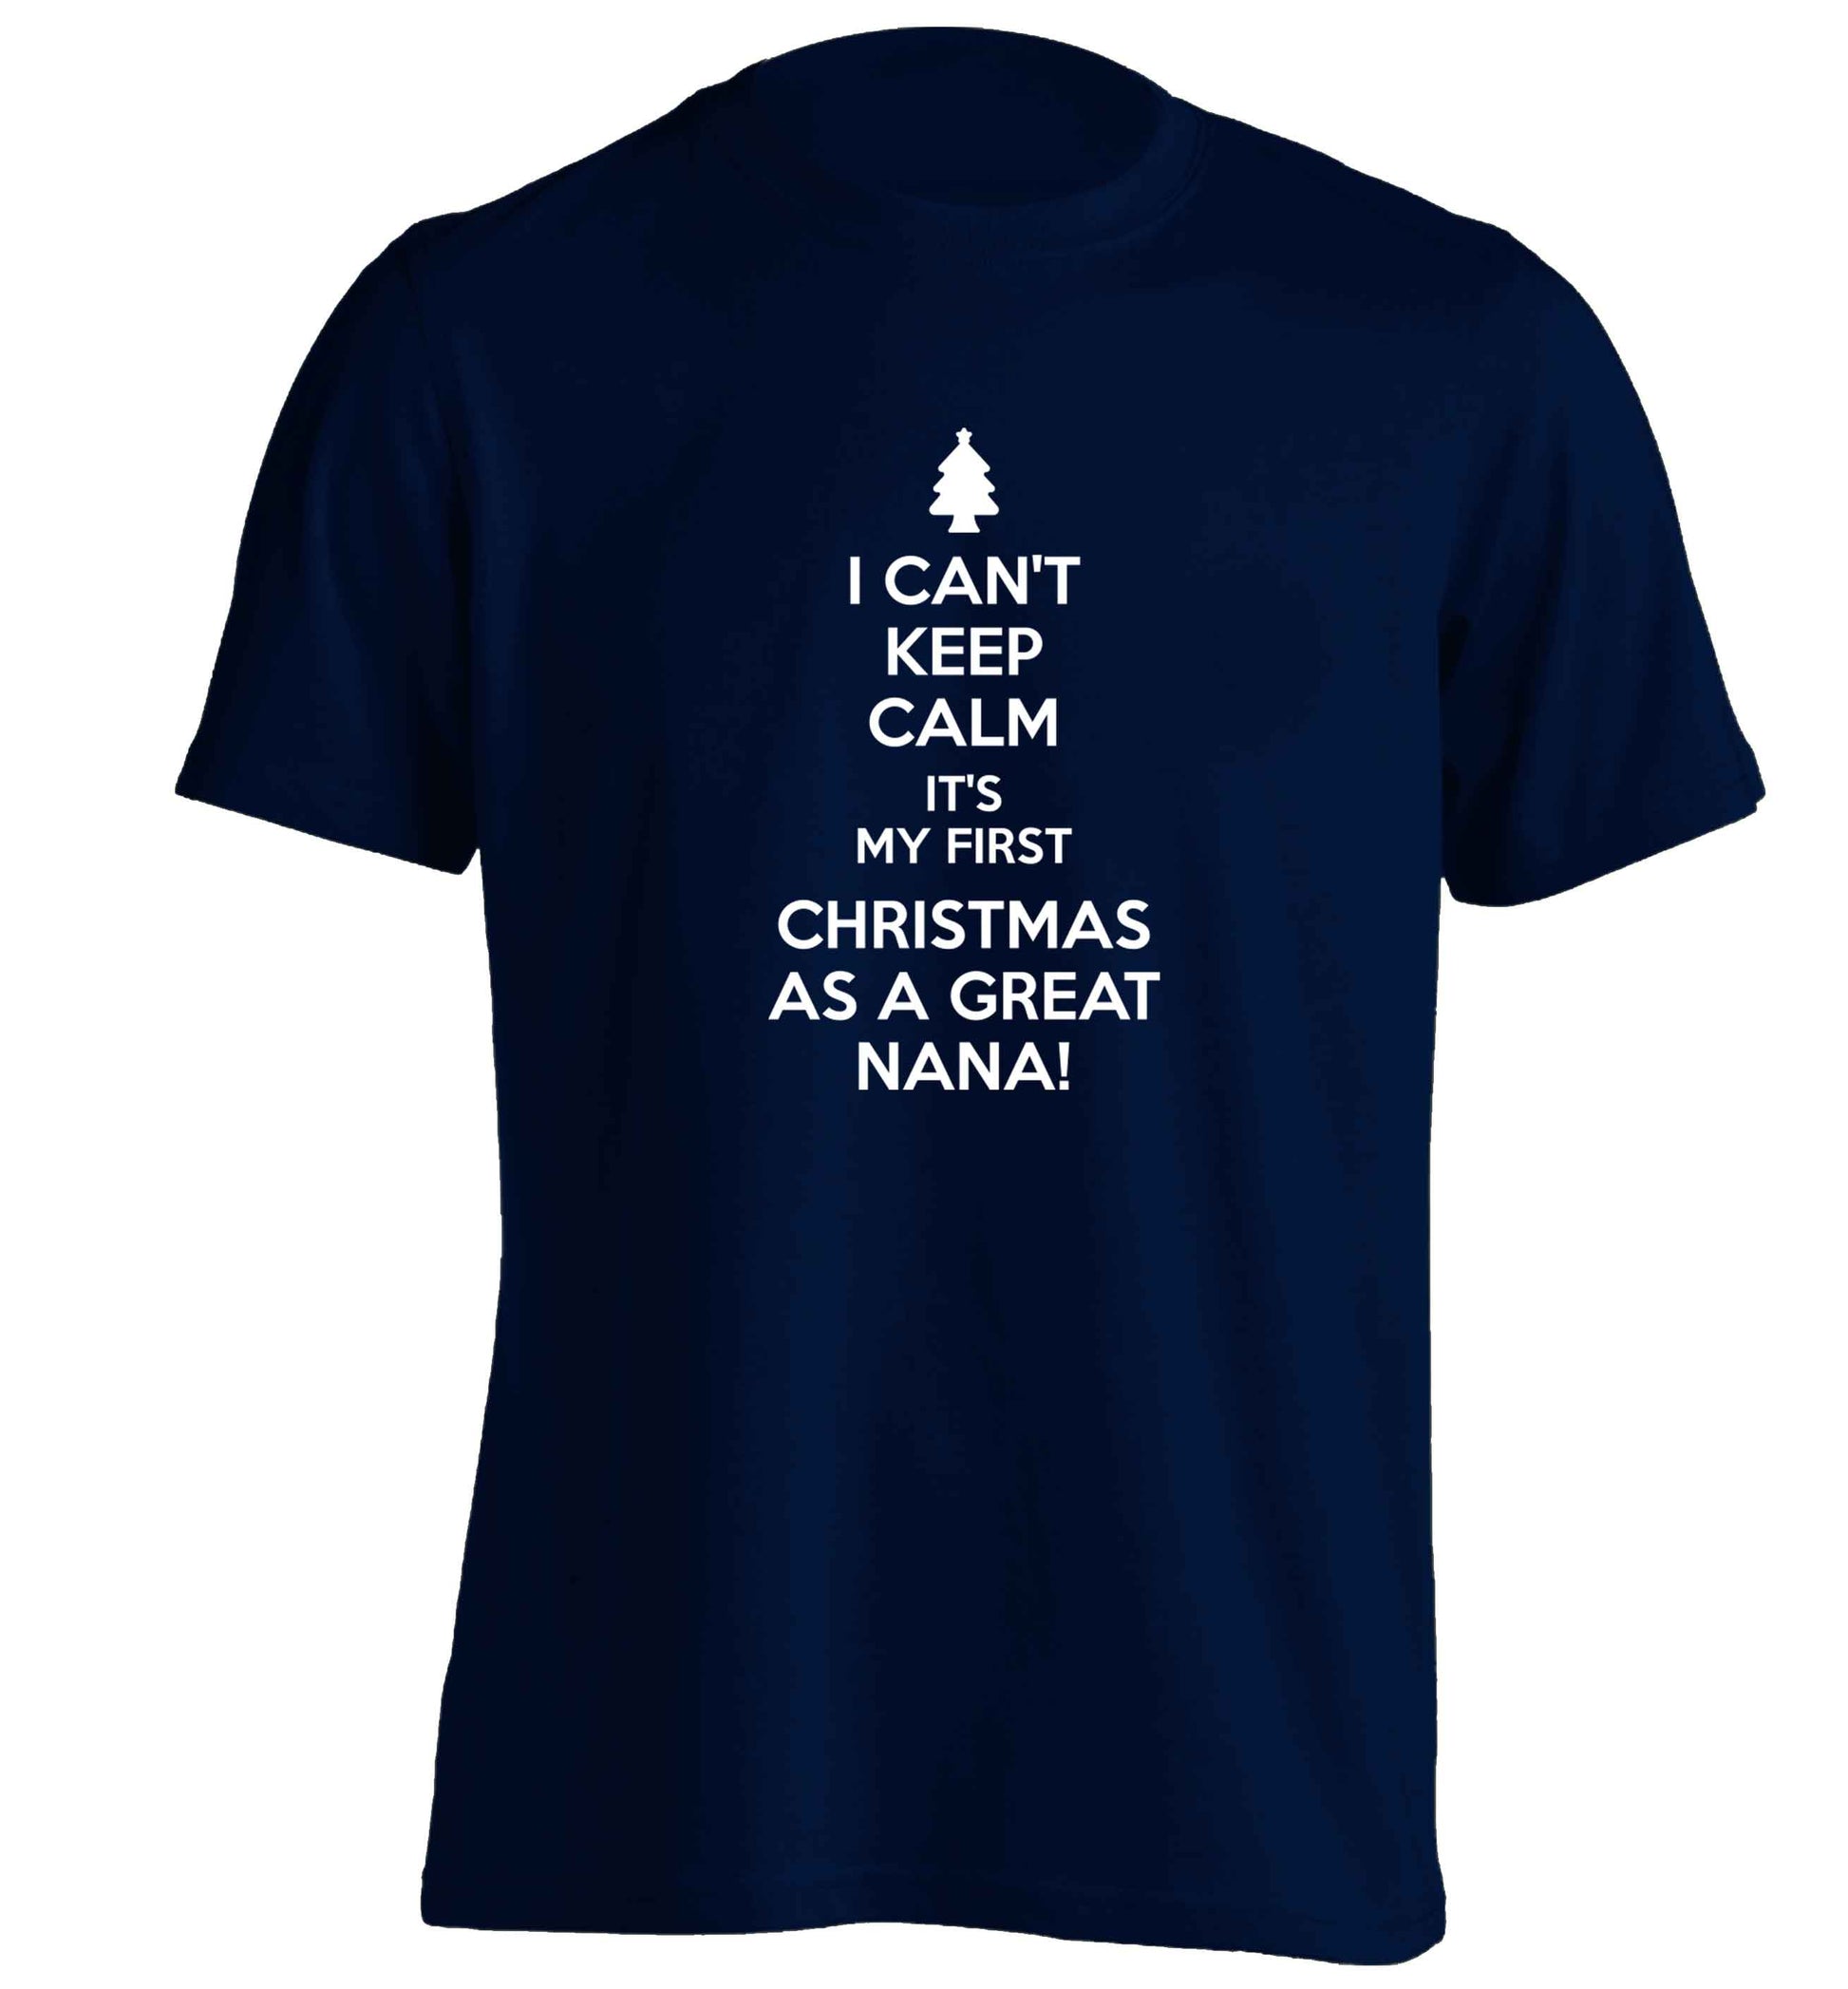 I can't keep calm it's my first Christmas as a great nana! adults unisex navy Tshirt 2XL